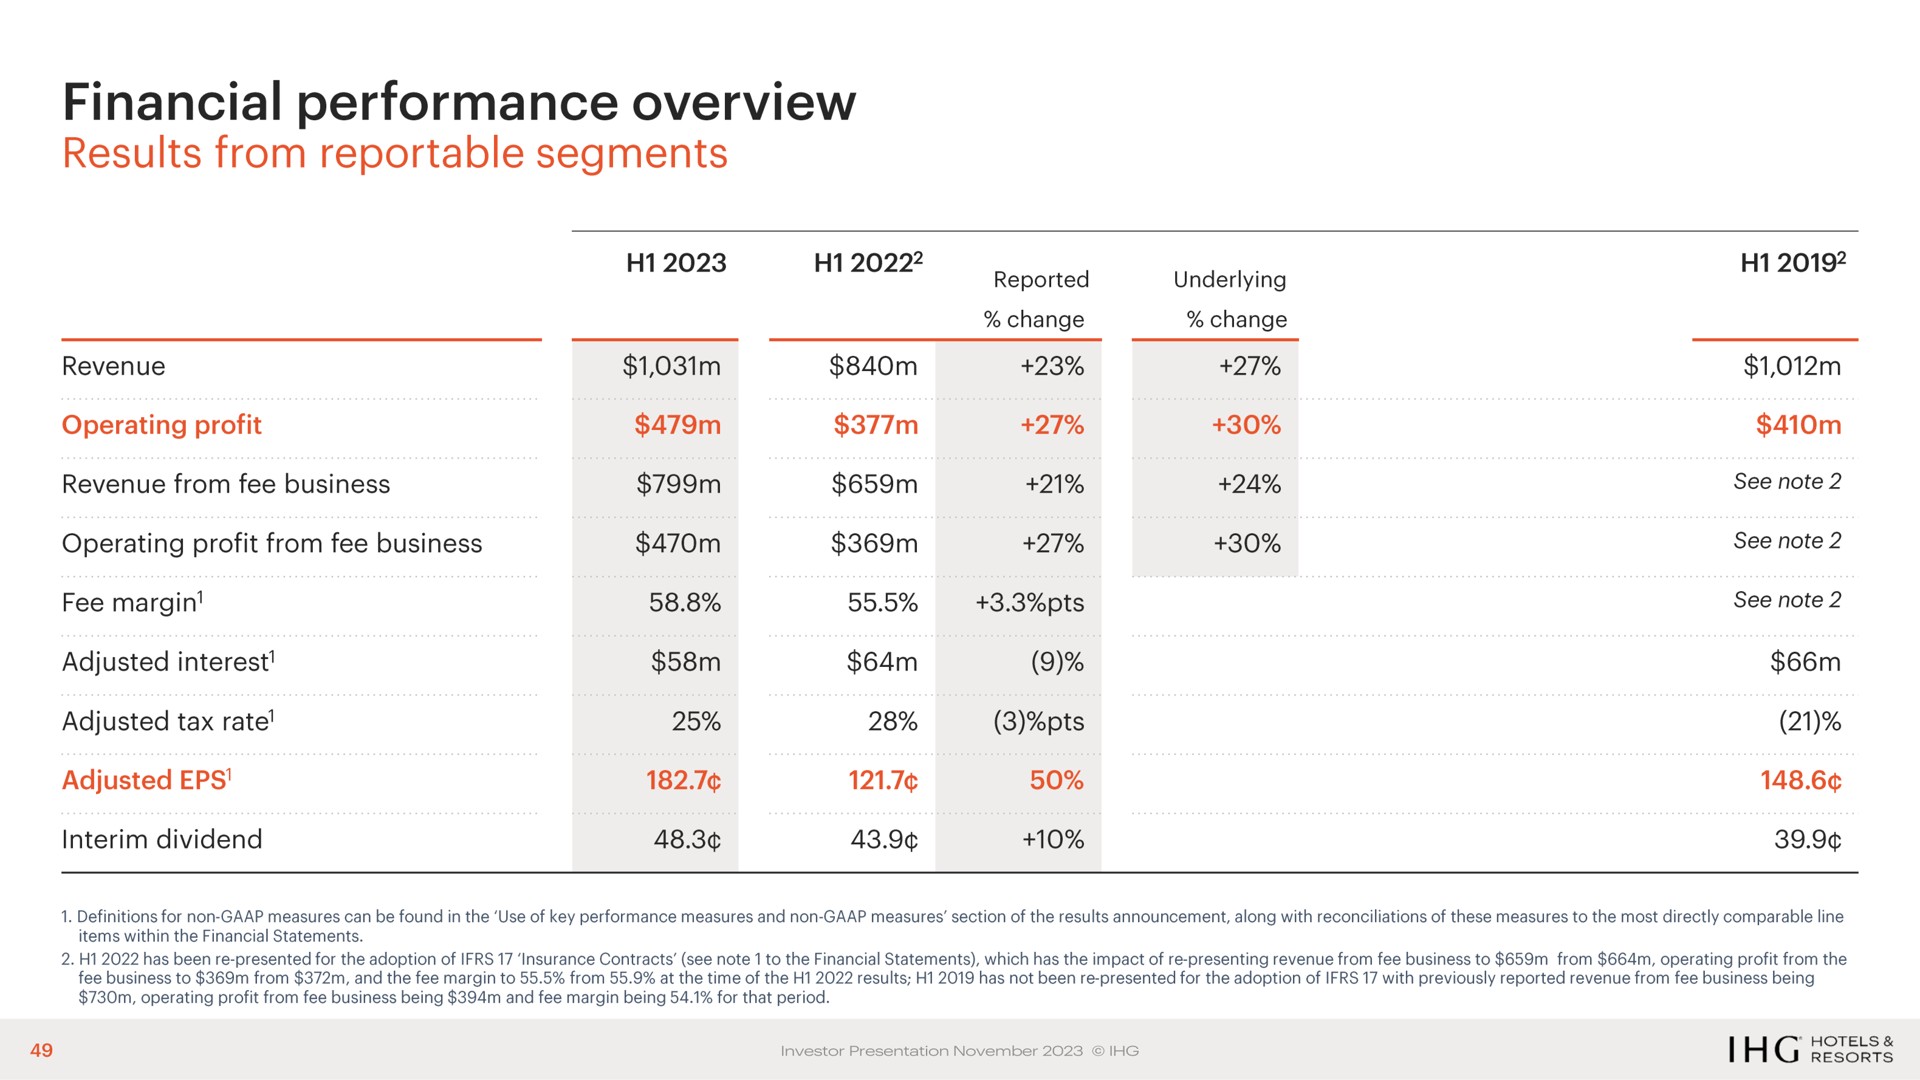 financial performance overview | IHG Hotels